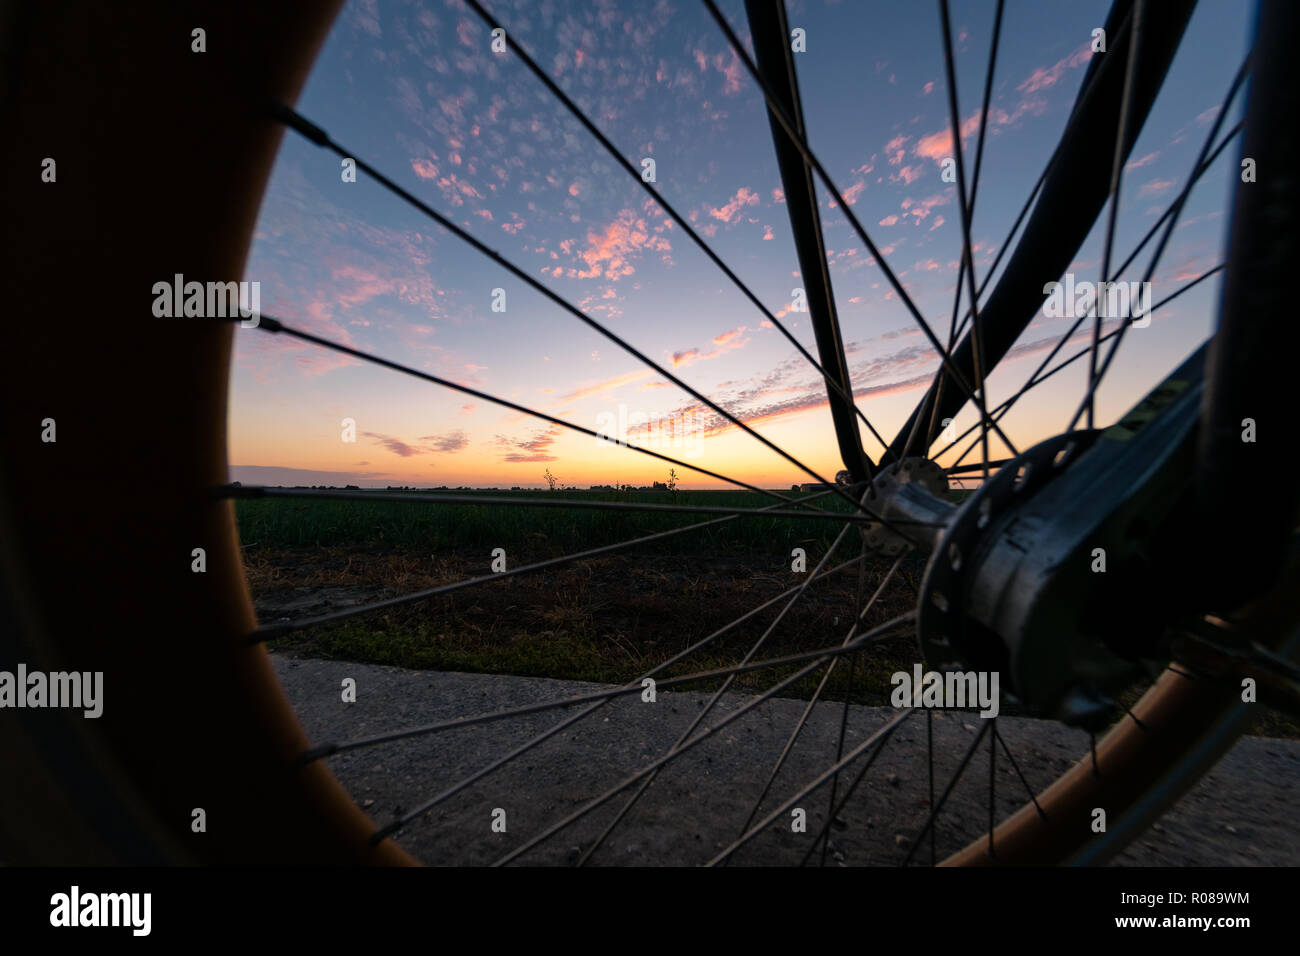 A colorful sunset in Holland as seen through the wheel of a bicycle Stock Photo